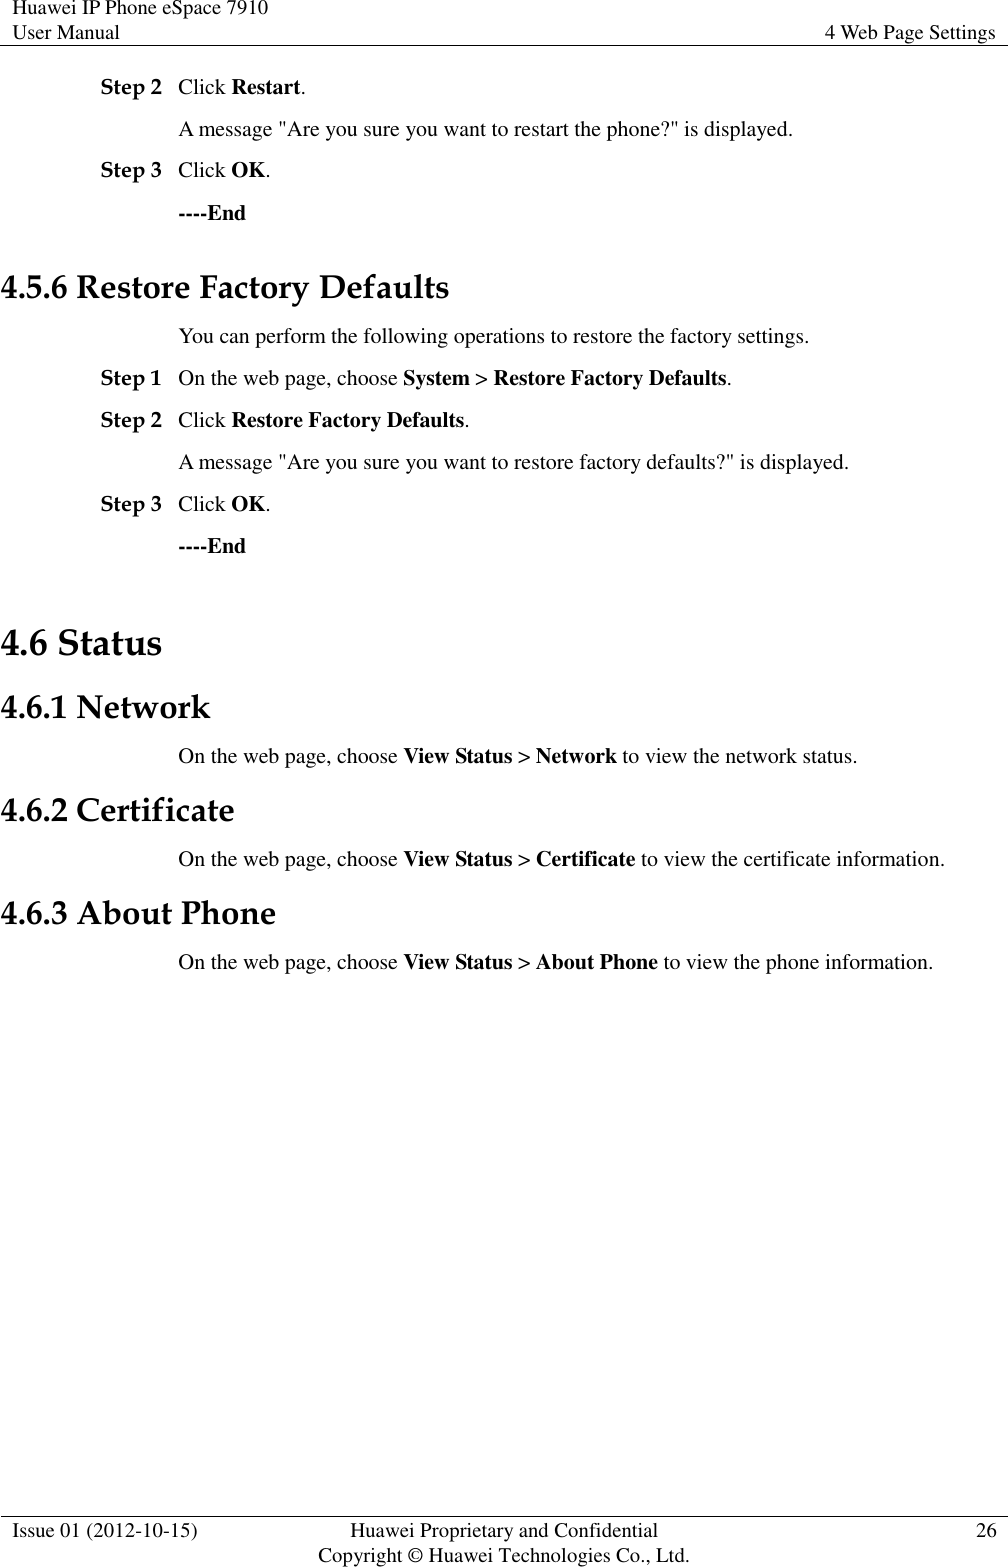 Huawei IP Phone eSpace 7910 User Manual 4 Web Page Settings  Issue 01 (2012-10-15) Huawei Proprietary and Confidential                                     Copyright © Huawei Technologies Co., Ltd. 26  Step 2 Click Restart. A message &quot;Are you sure you want to restart the phone?&quot; is displayed. Step 3 Click OK.   ----End 4.5.6 Restore Factory Defaults You can perform the following operations to restore the factory settings. Step 1 On the web page, choose System &gt; Restore Factory Defaults. Step 2 Click Restore Factory Defaults. A message &quot;Are you sure you want to restore factory defaults?&quot; is displayed. Step 3 Click OK. ----End 4.6 Status 4.6.1 Network On the web page, choose View Status &gt; Network to view the network status. 4.6.2 Certificate On the web page, choose View Status &gt; Certificate to view the certificate information. 4.6.3 About Phone On the web page, choose View Status &gt; About Phone to view the phone information. 